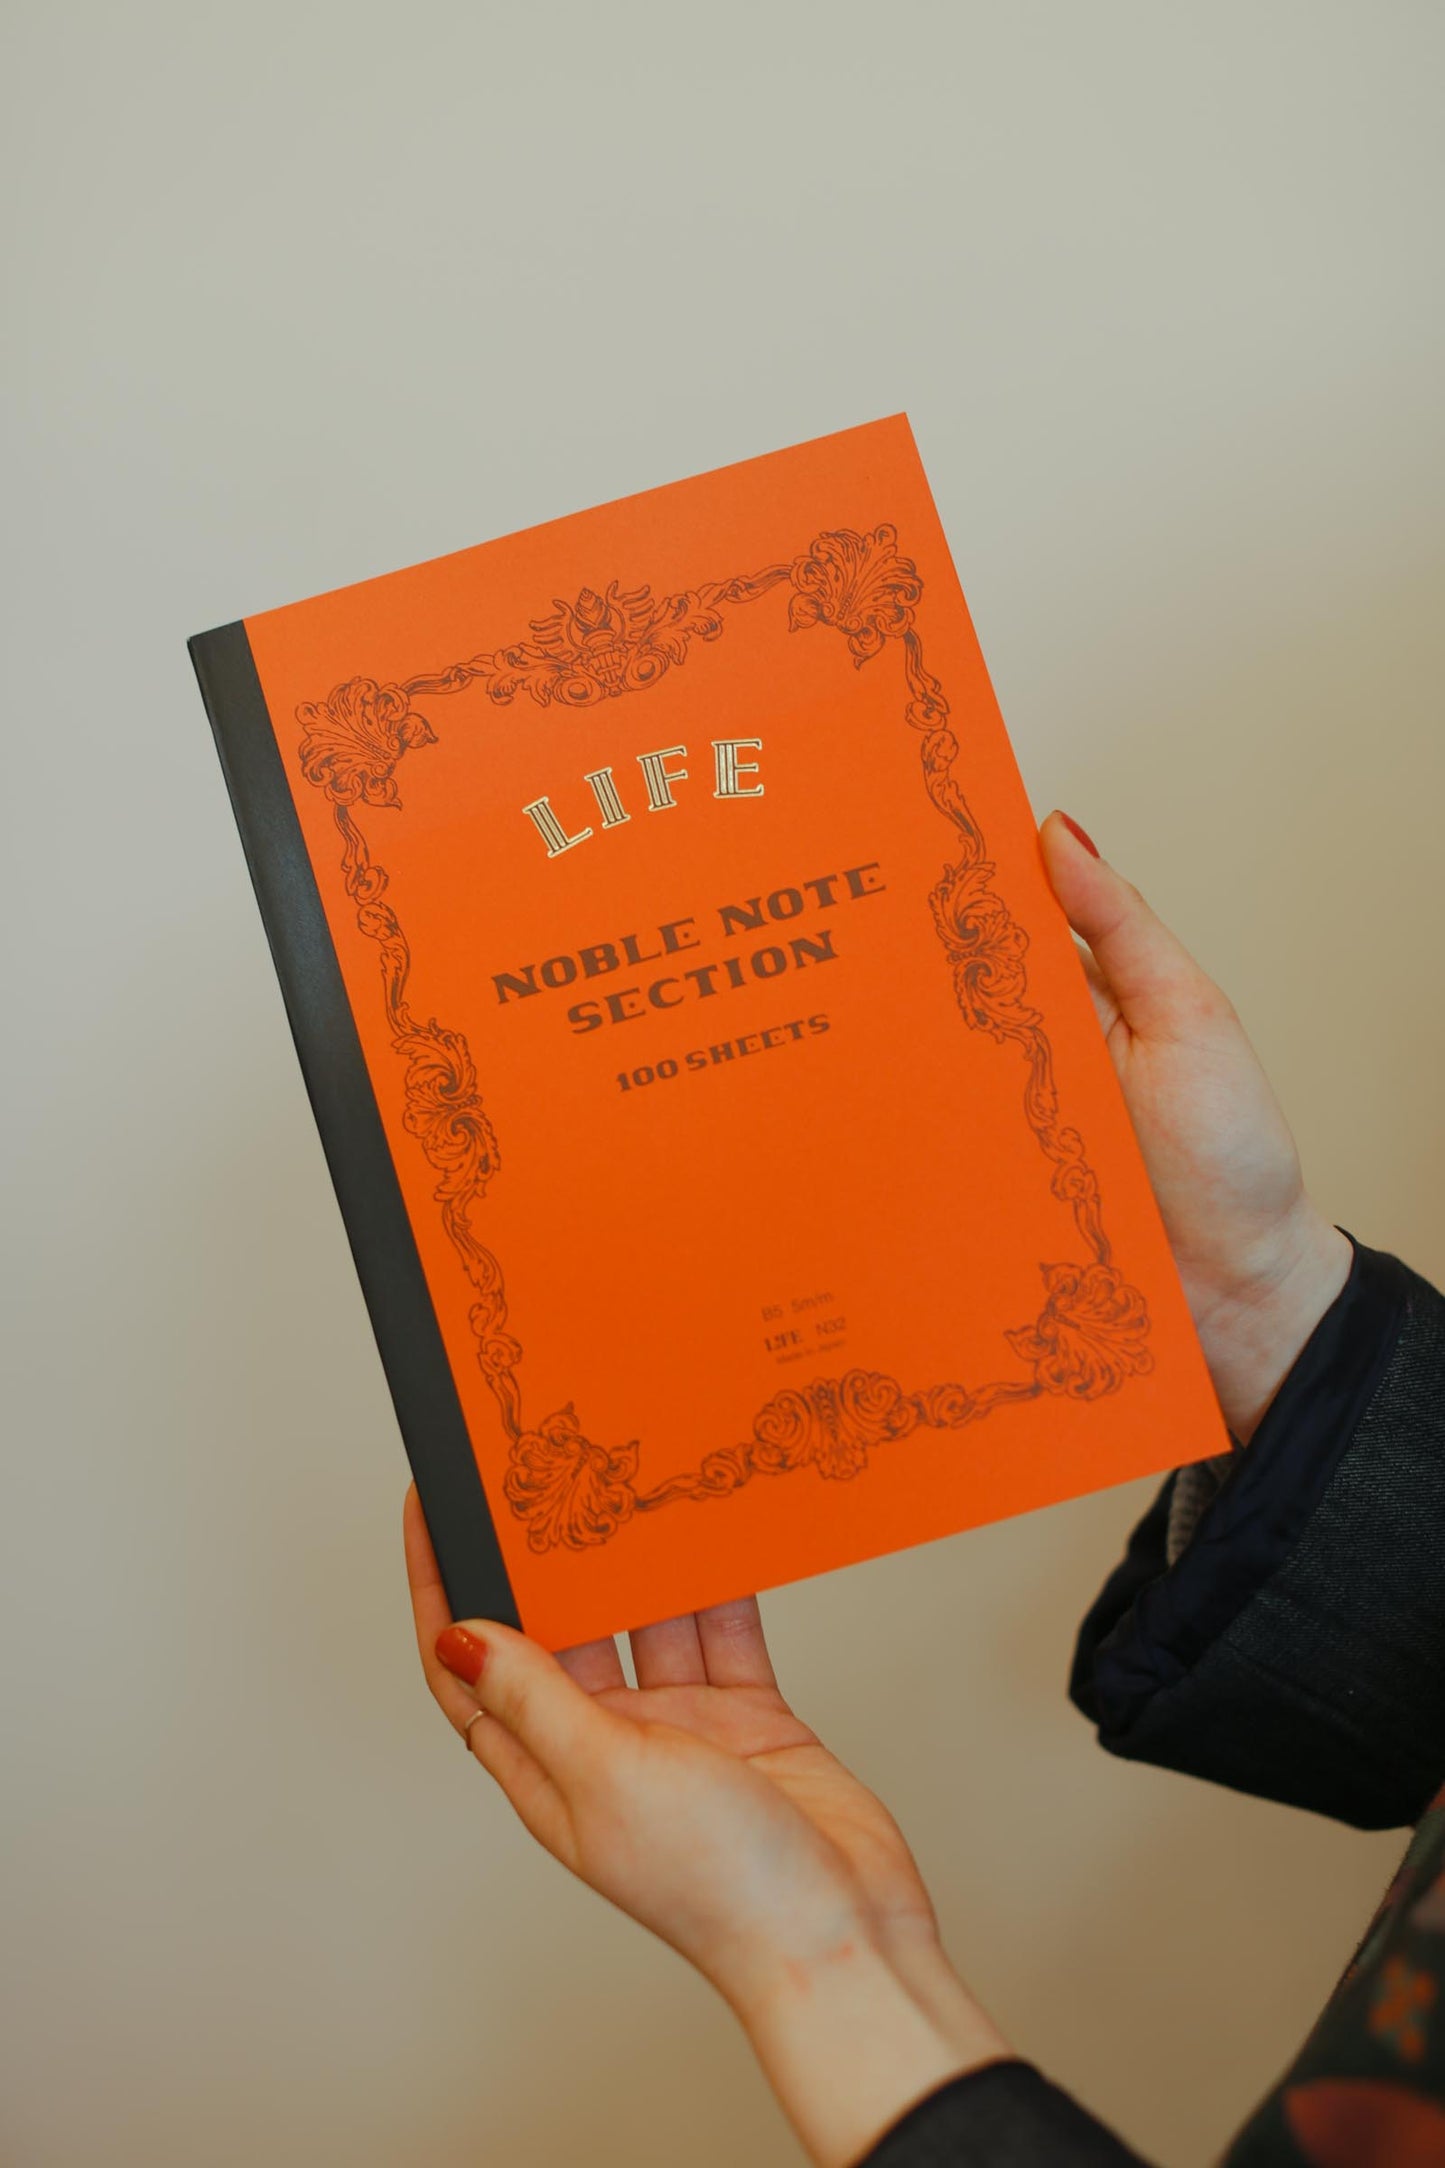 LIFE Noble Notebook (Section)